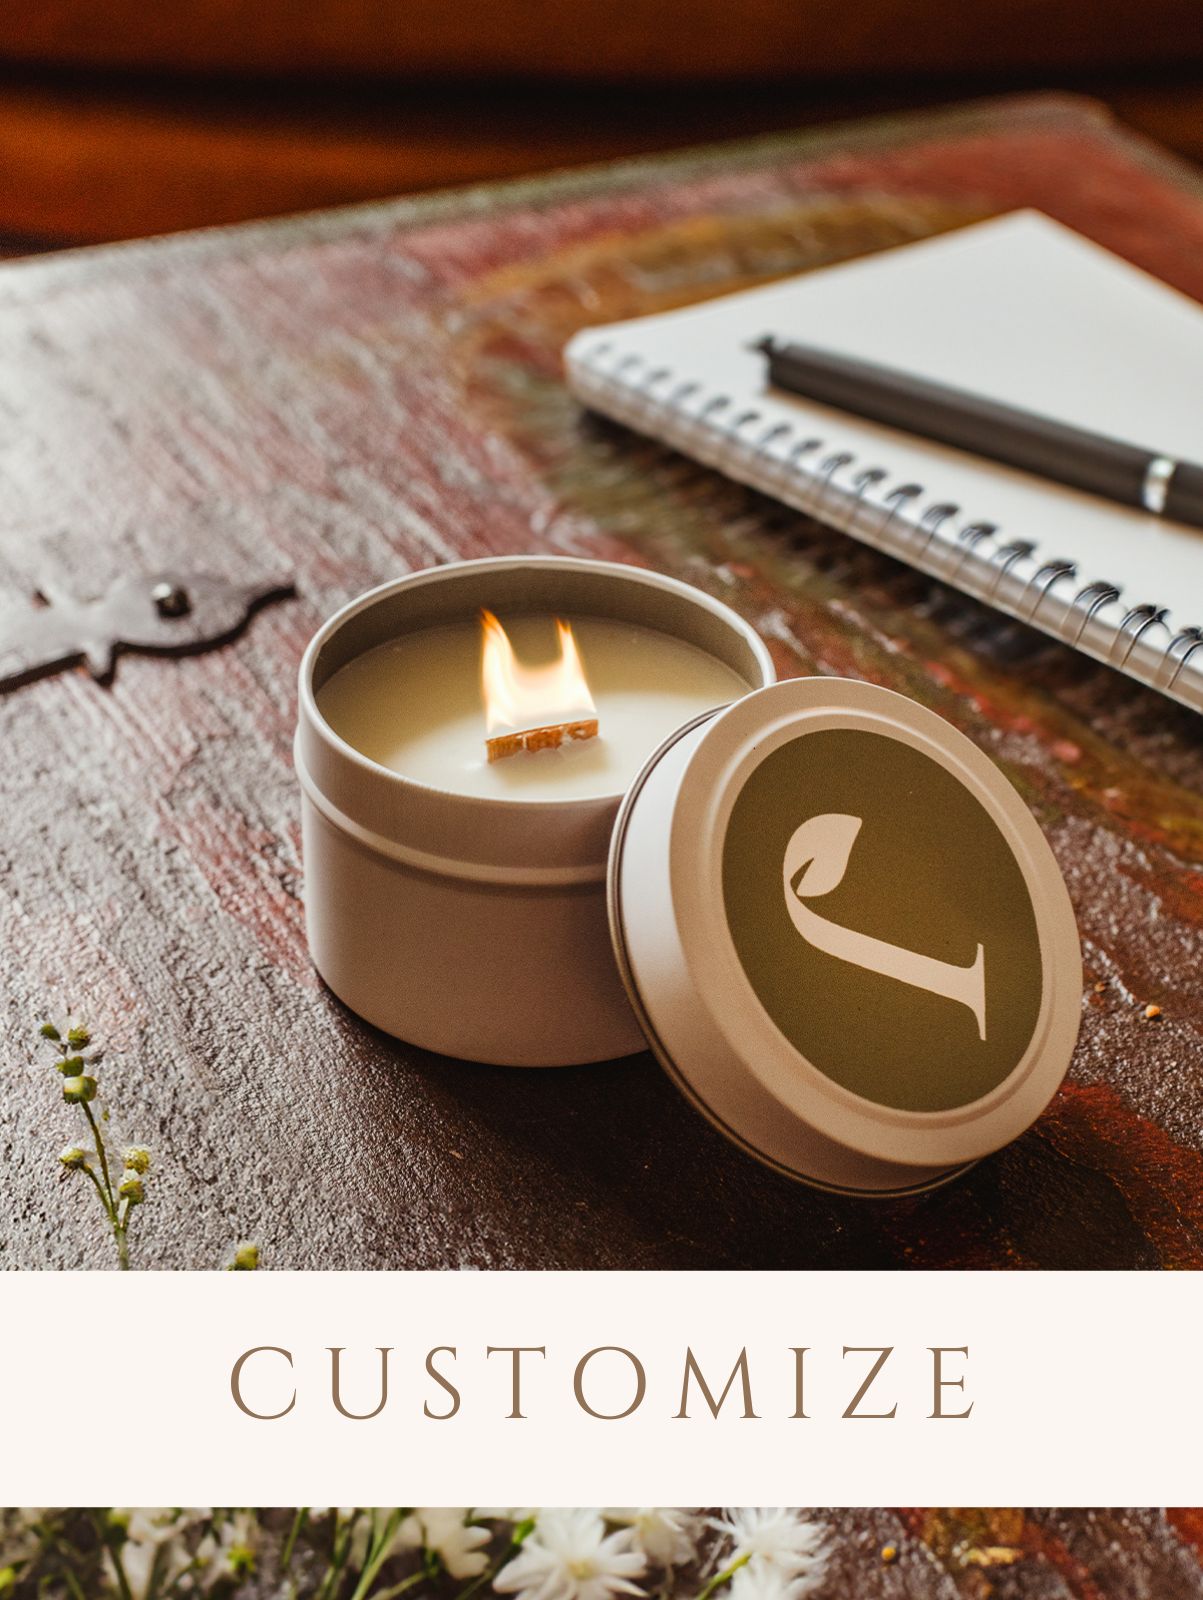 Small candle with company logo. Candle is on a wood surface with a notebook and flowers. Digital sticker to indicate the product is customizable.